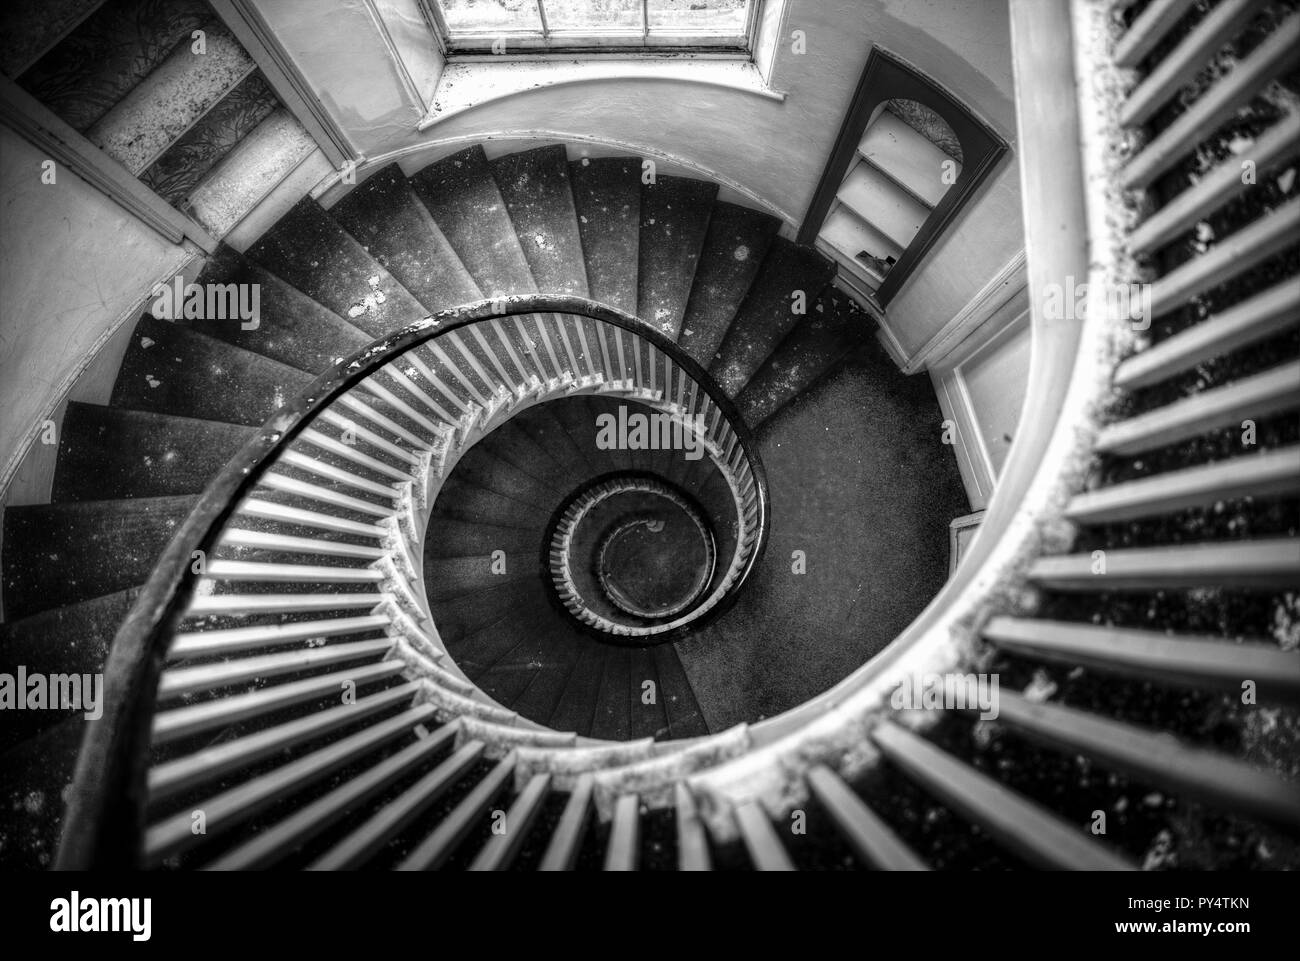 Spiral staircase, Spiral stairs, wooden spiral staircase, spiral stair case, Spiral stairs staircase, abstract, black and white, winding staircase, Stock Photo